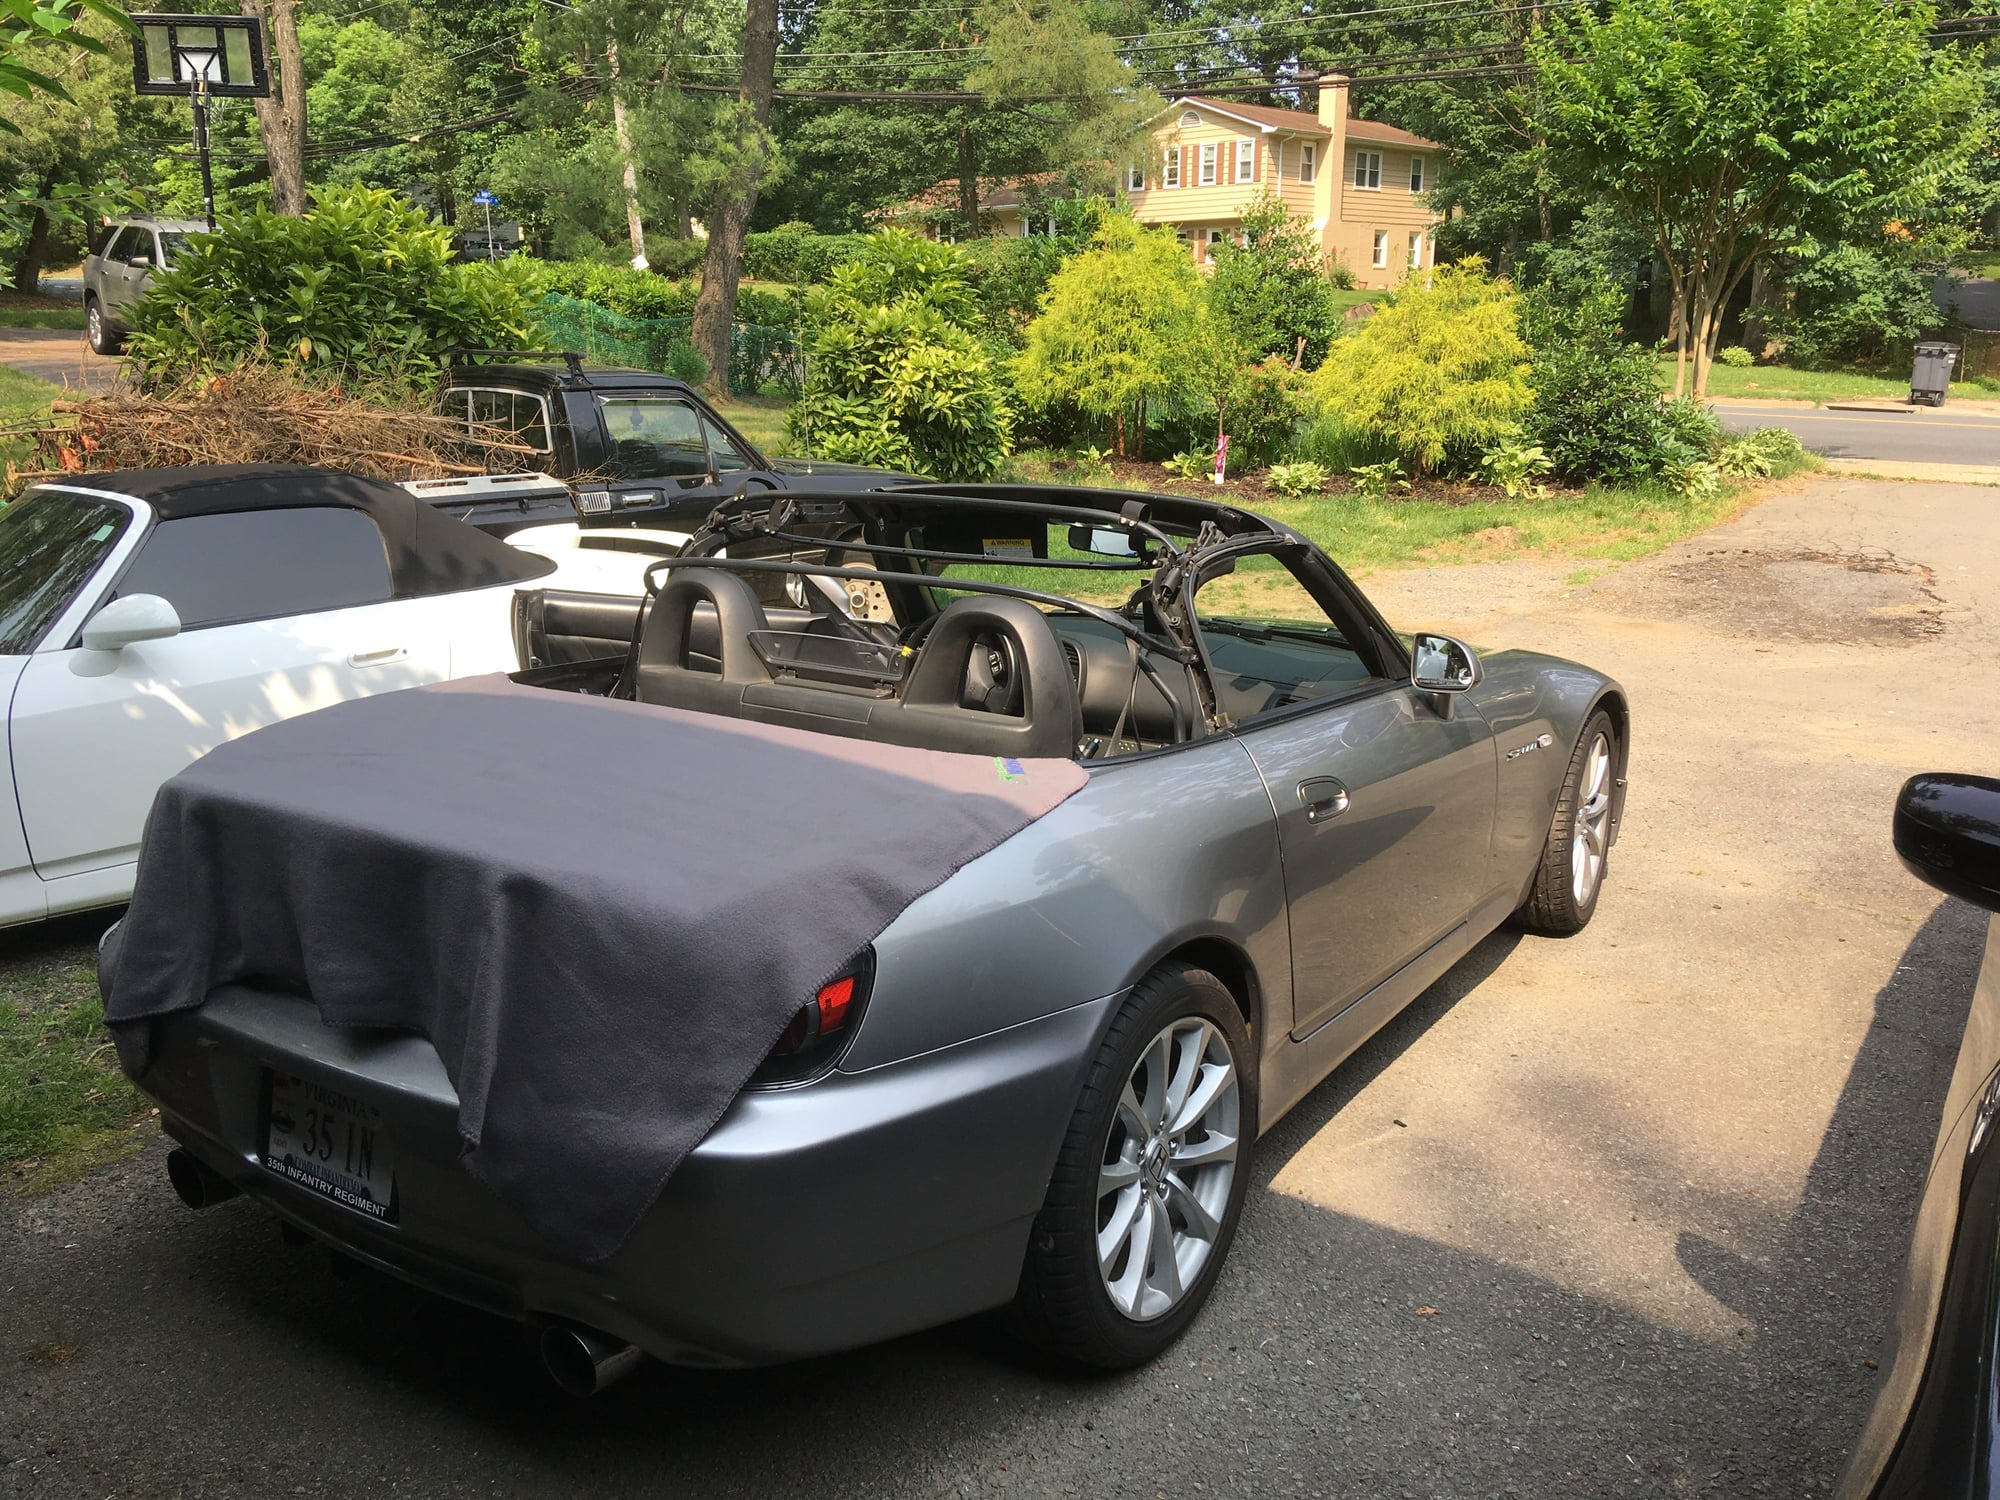 Honda S2000 (AP1) soft top, produced in Haartz Stayfast Canvas and